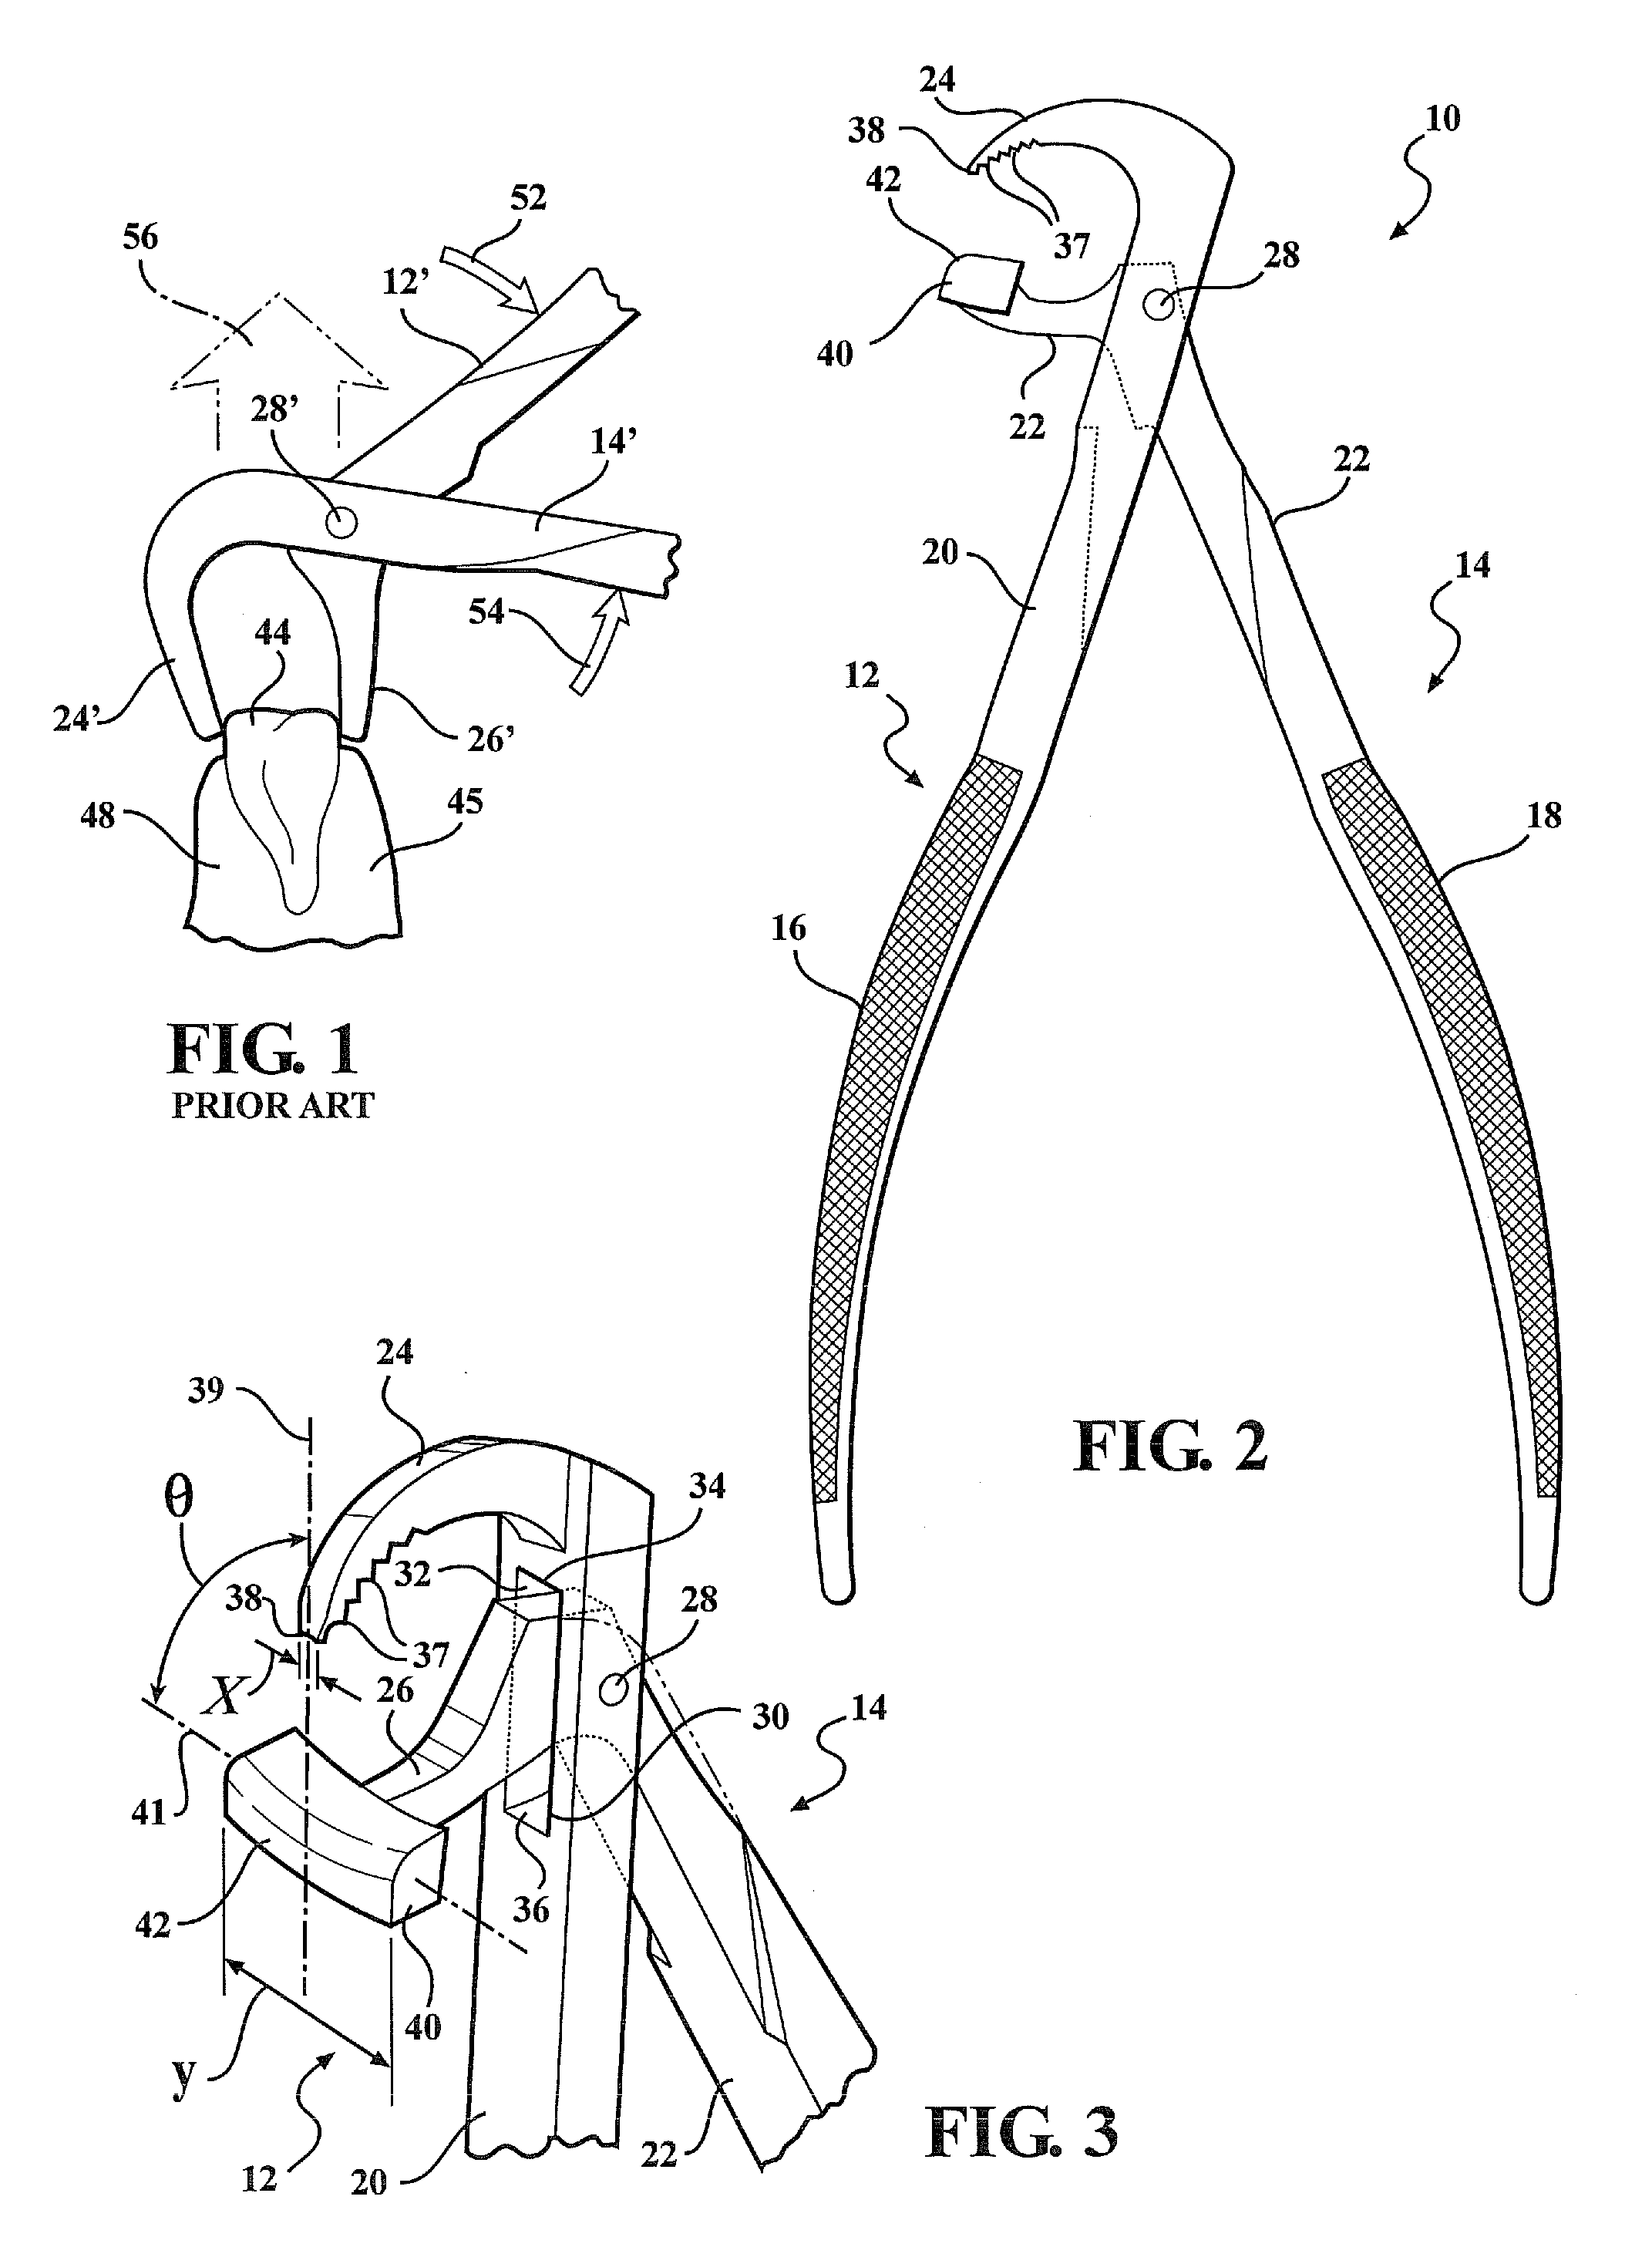 Dental plier design with offsetting jaw and pad elements for assisting in removing upper and lower teeth utilizing the dental plier design